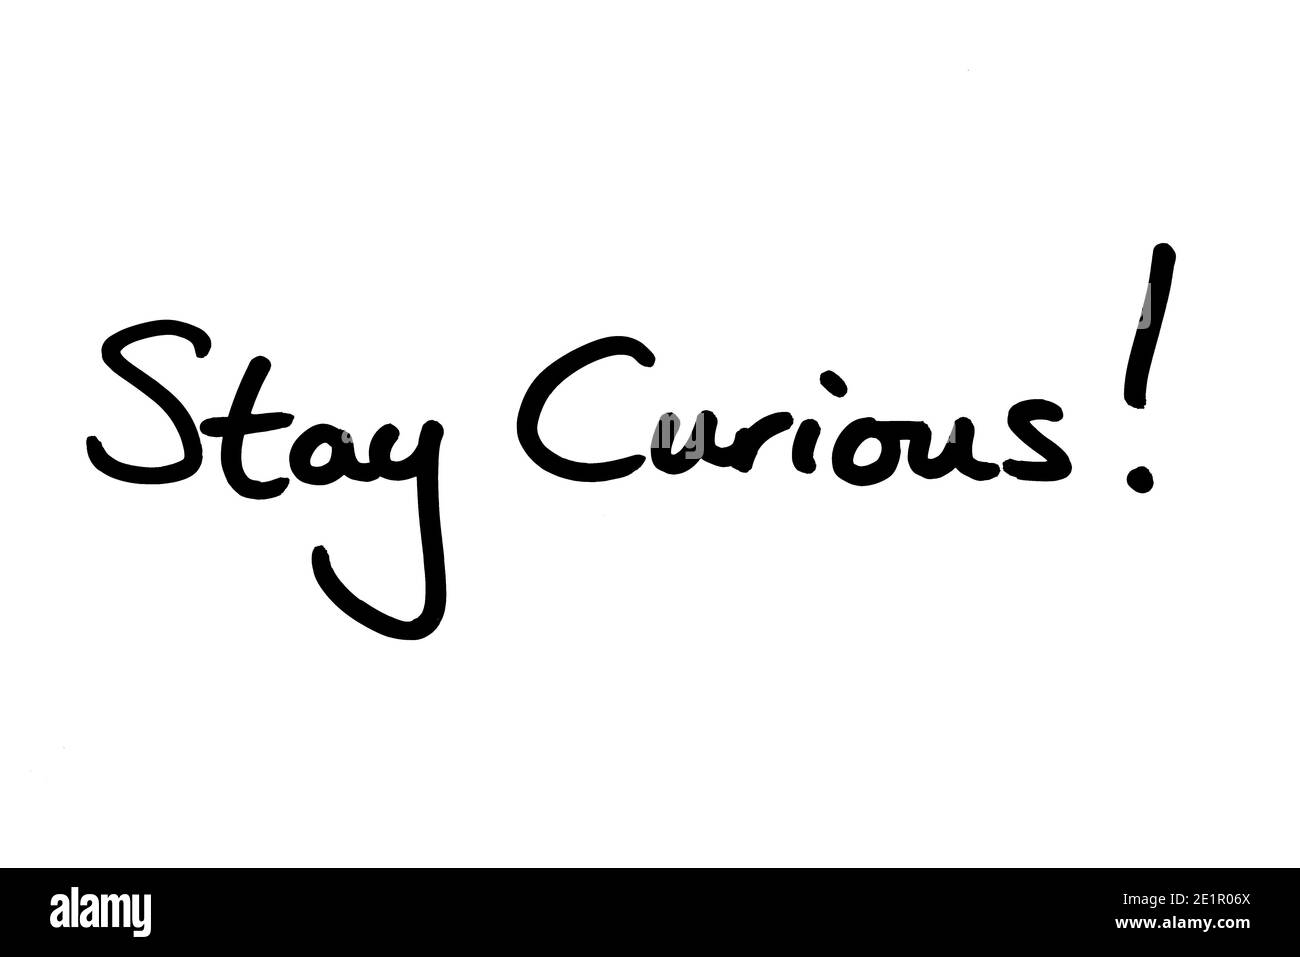 Stay Curious! handwritten on a white background. Stock Photo